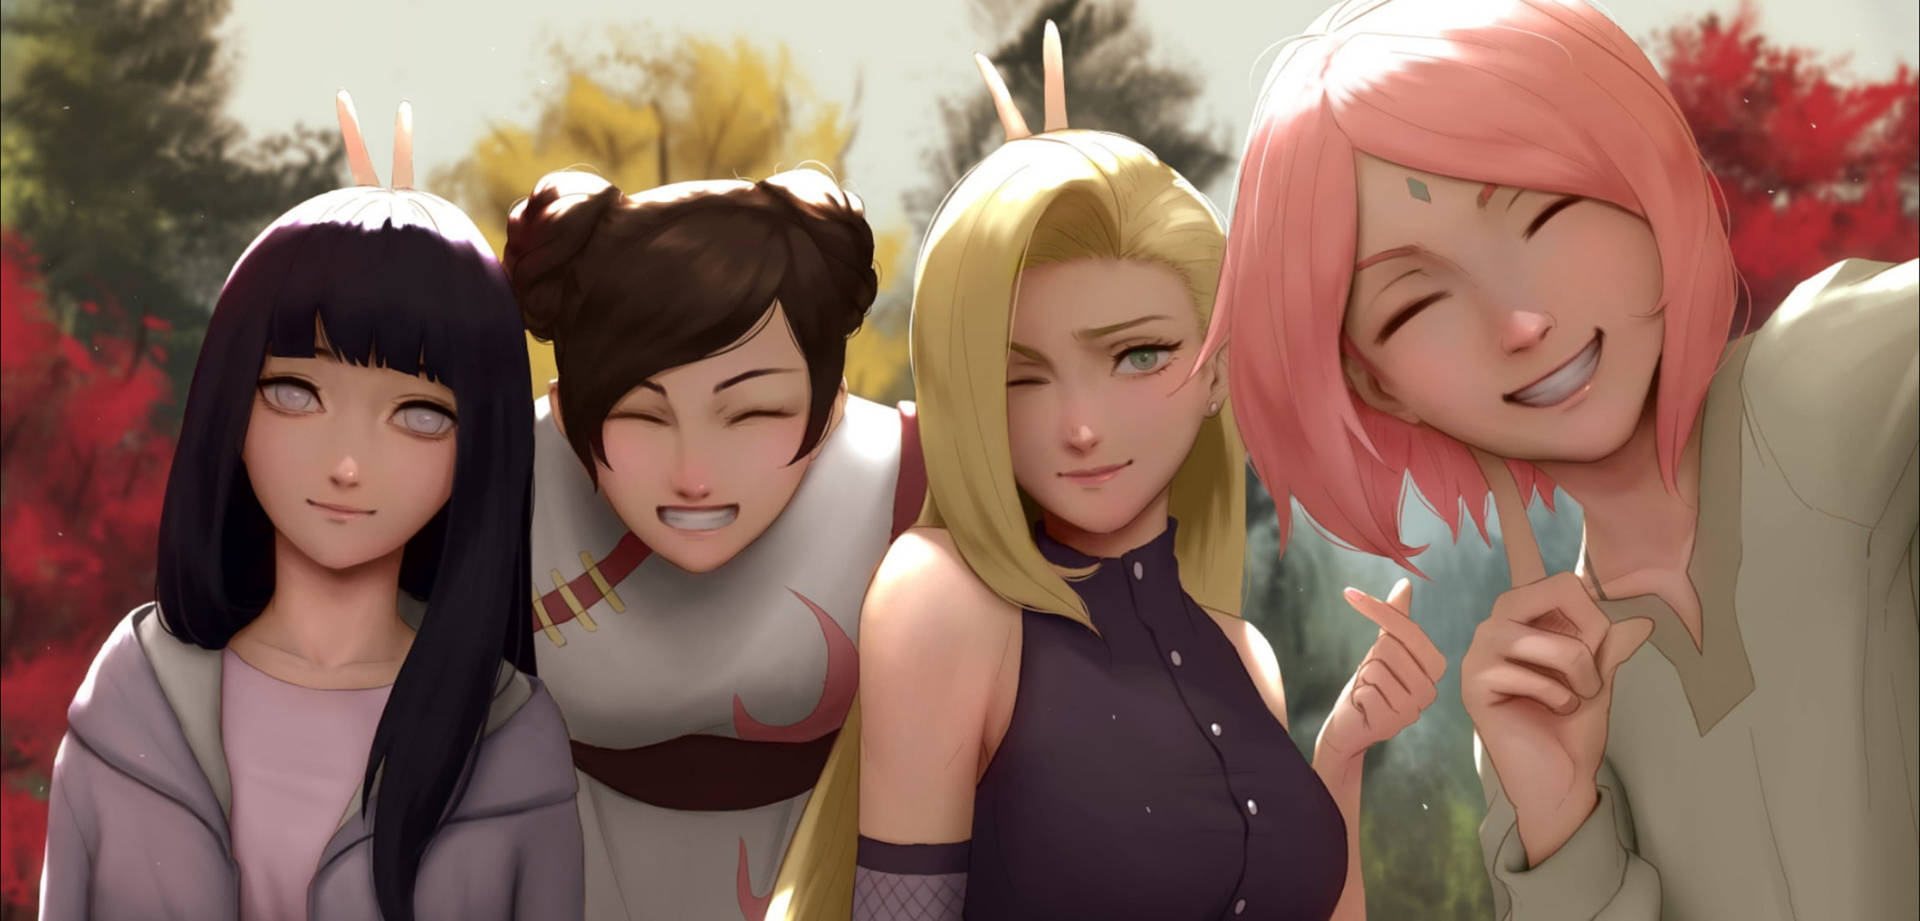 Engaging 4K Wallpaper Featuring Iconic Naruto Female Characters Wallpaper